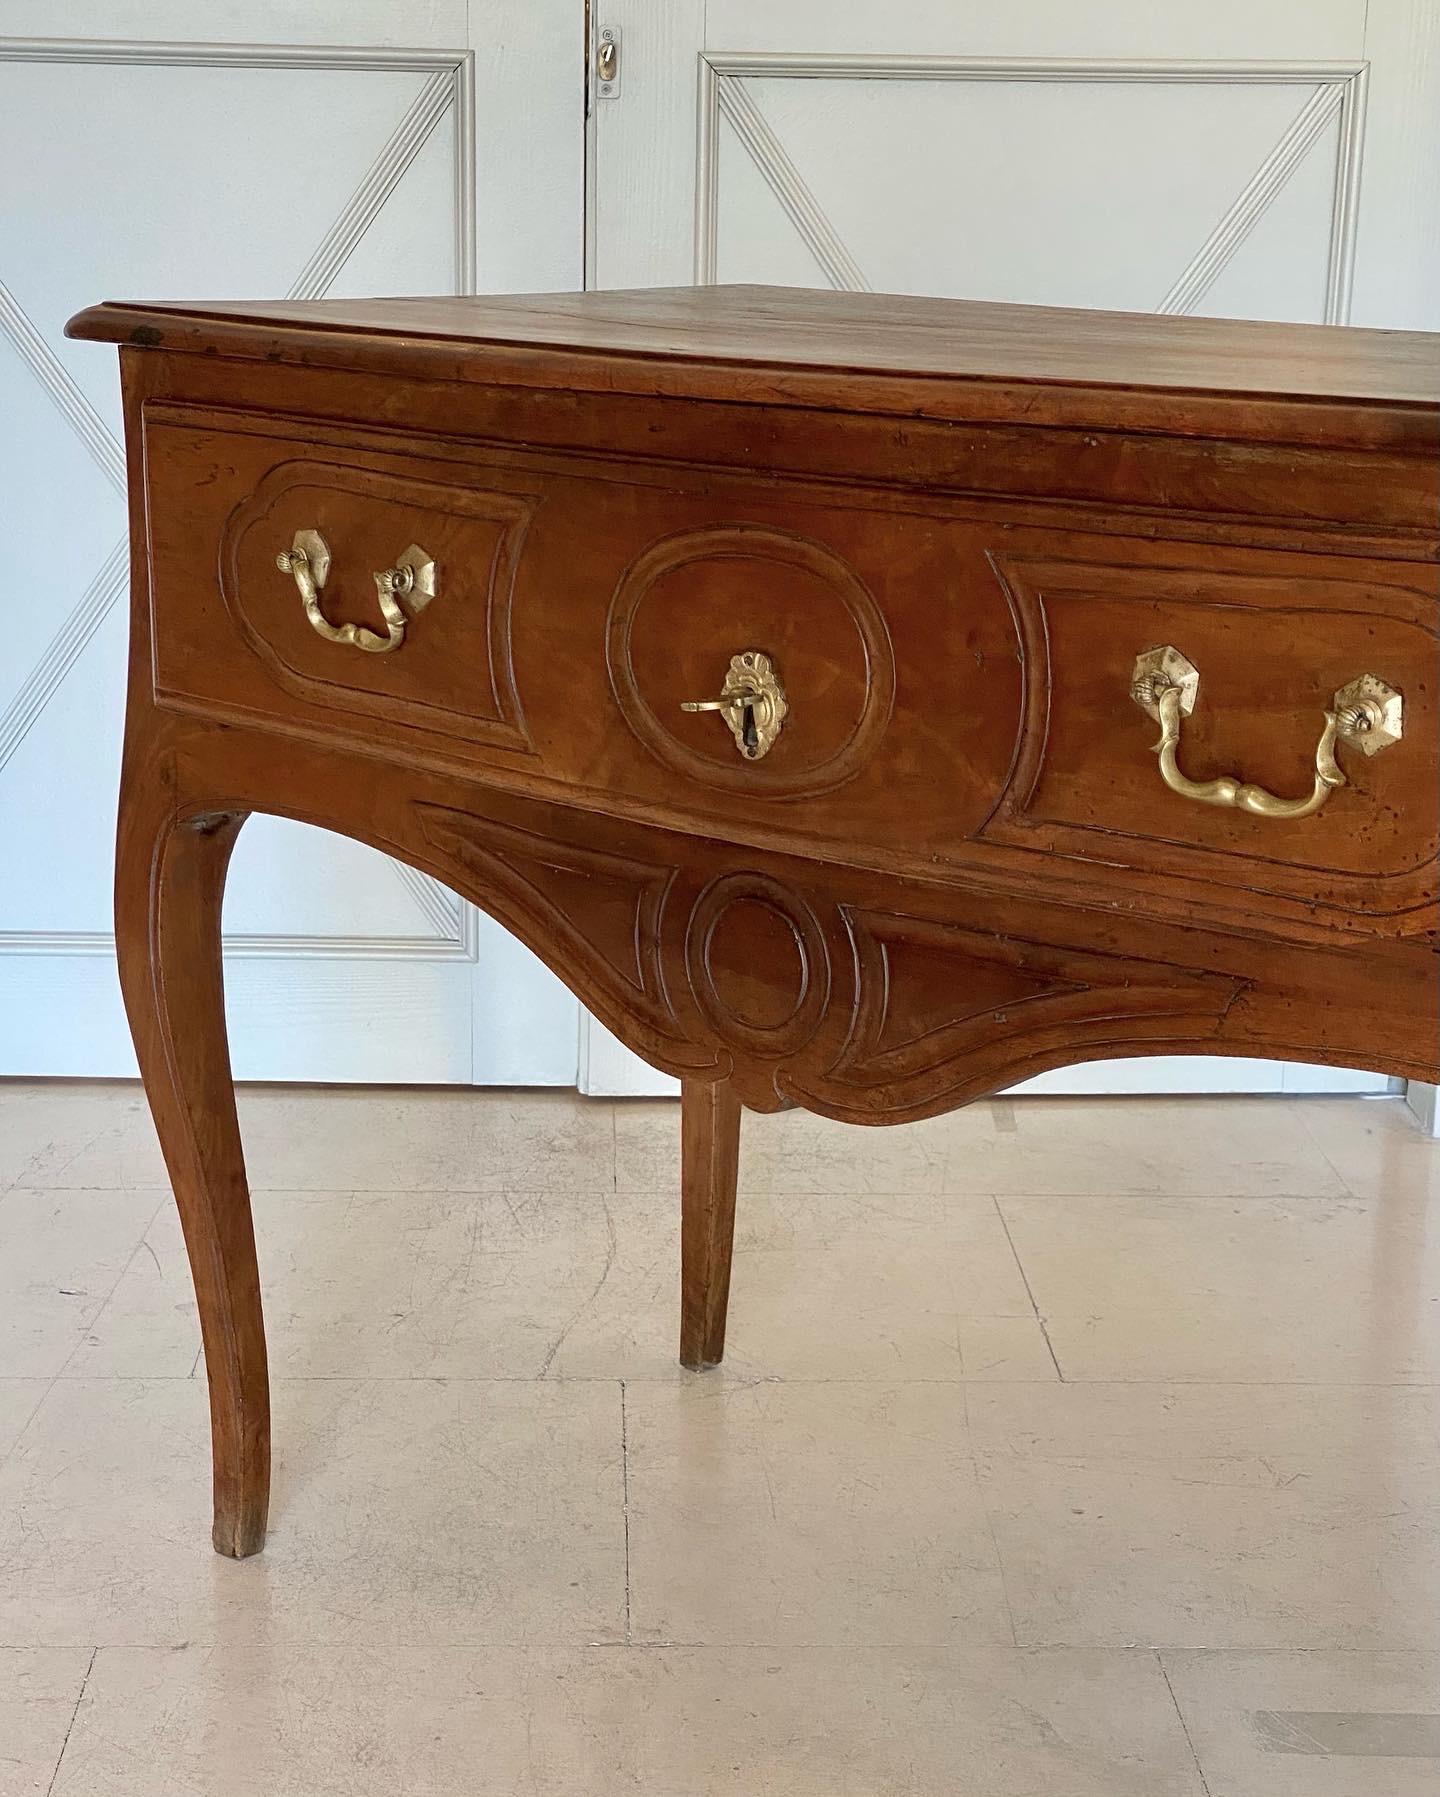 Beautiful and elegant Italian mid 18th century Louis XV period walnut console table. This extremely decorative console table is raised by most elegant cabriole legs and the walnut veneer embellishes the curved tops and the drawer.
The nice bronze